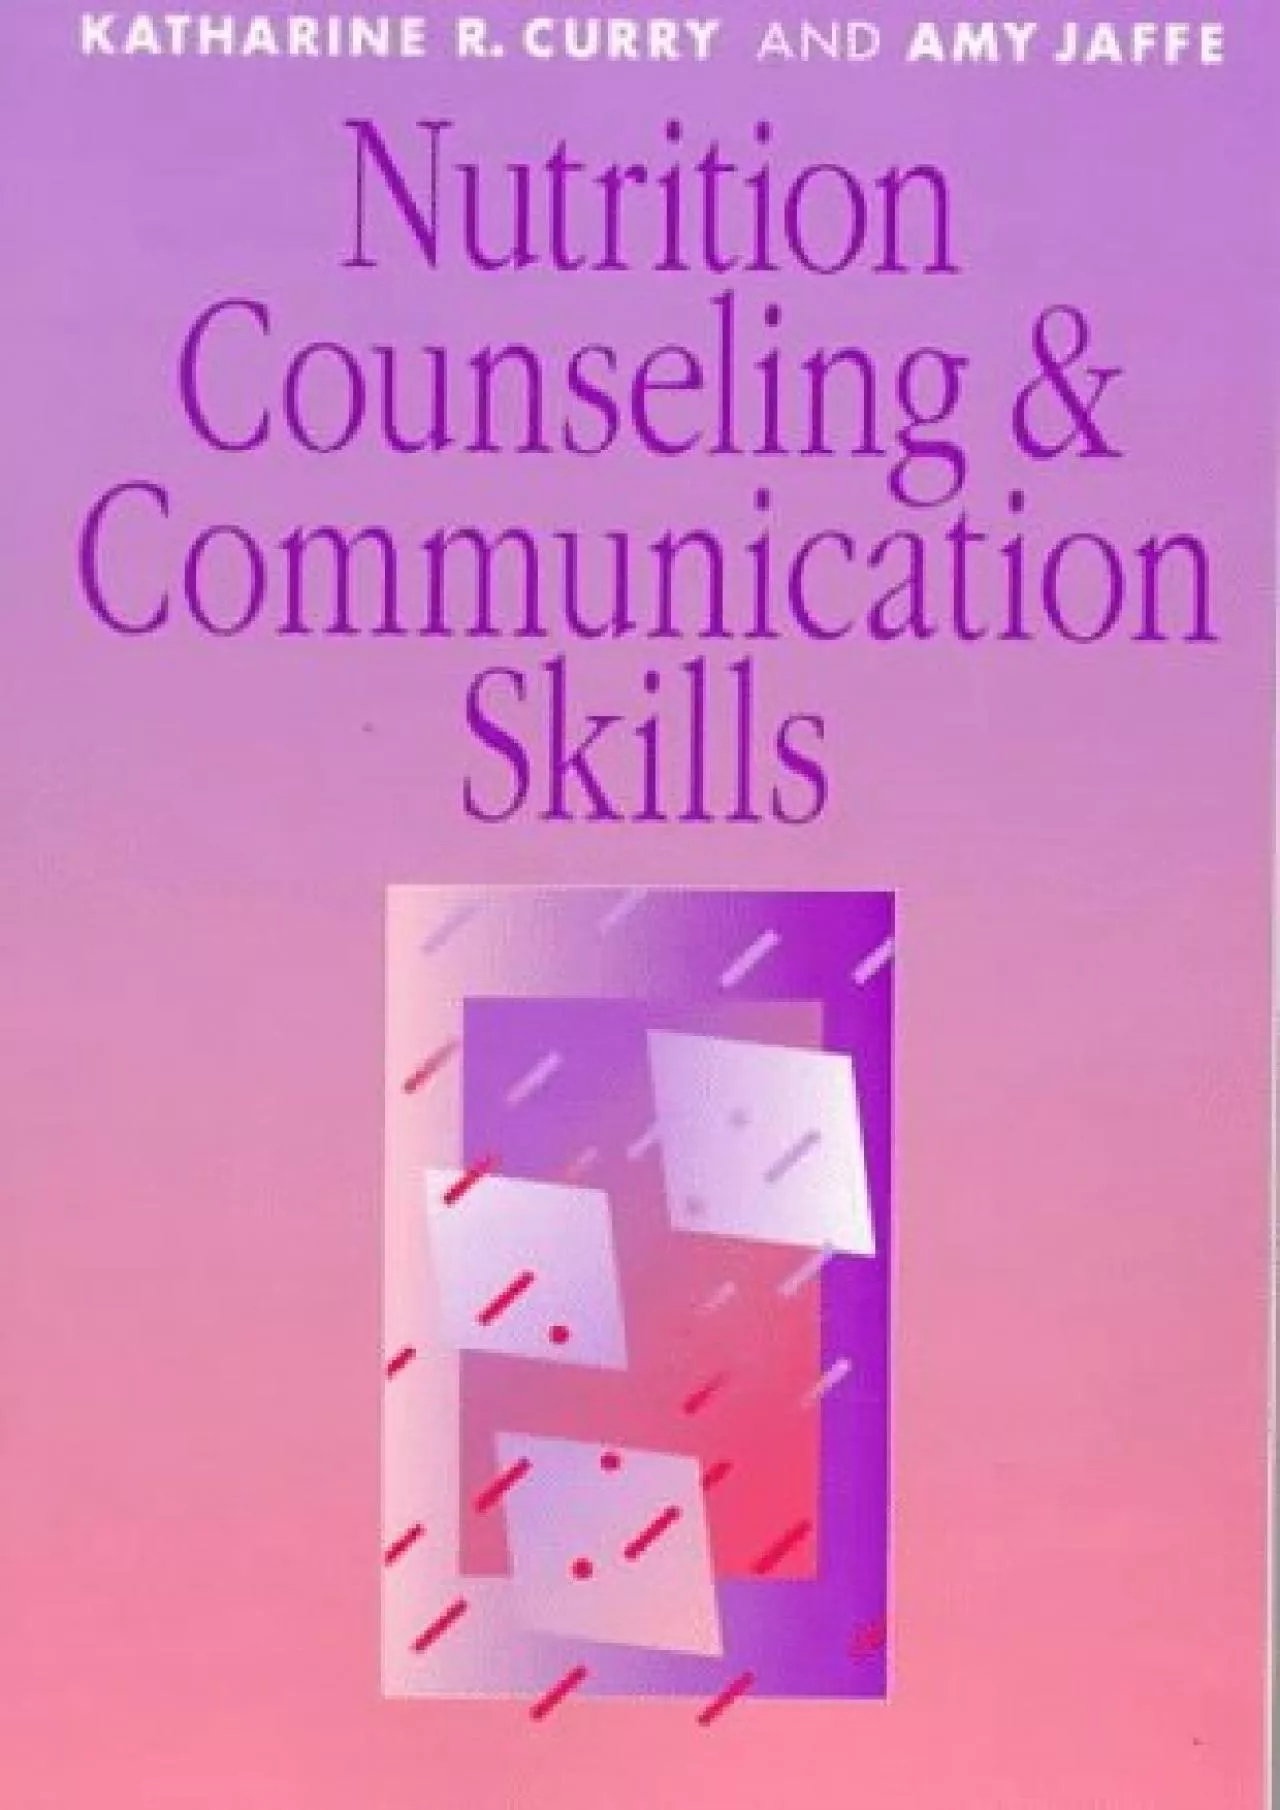 (BOOK)-Nutrition Counseling & Communication Skills